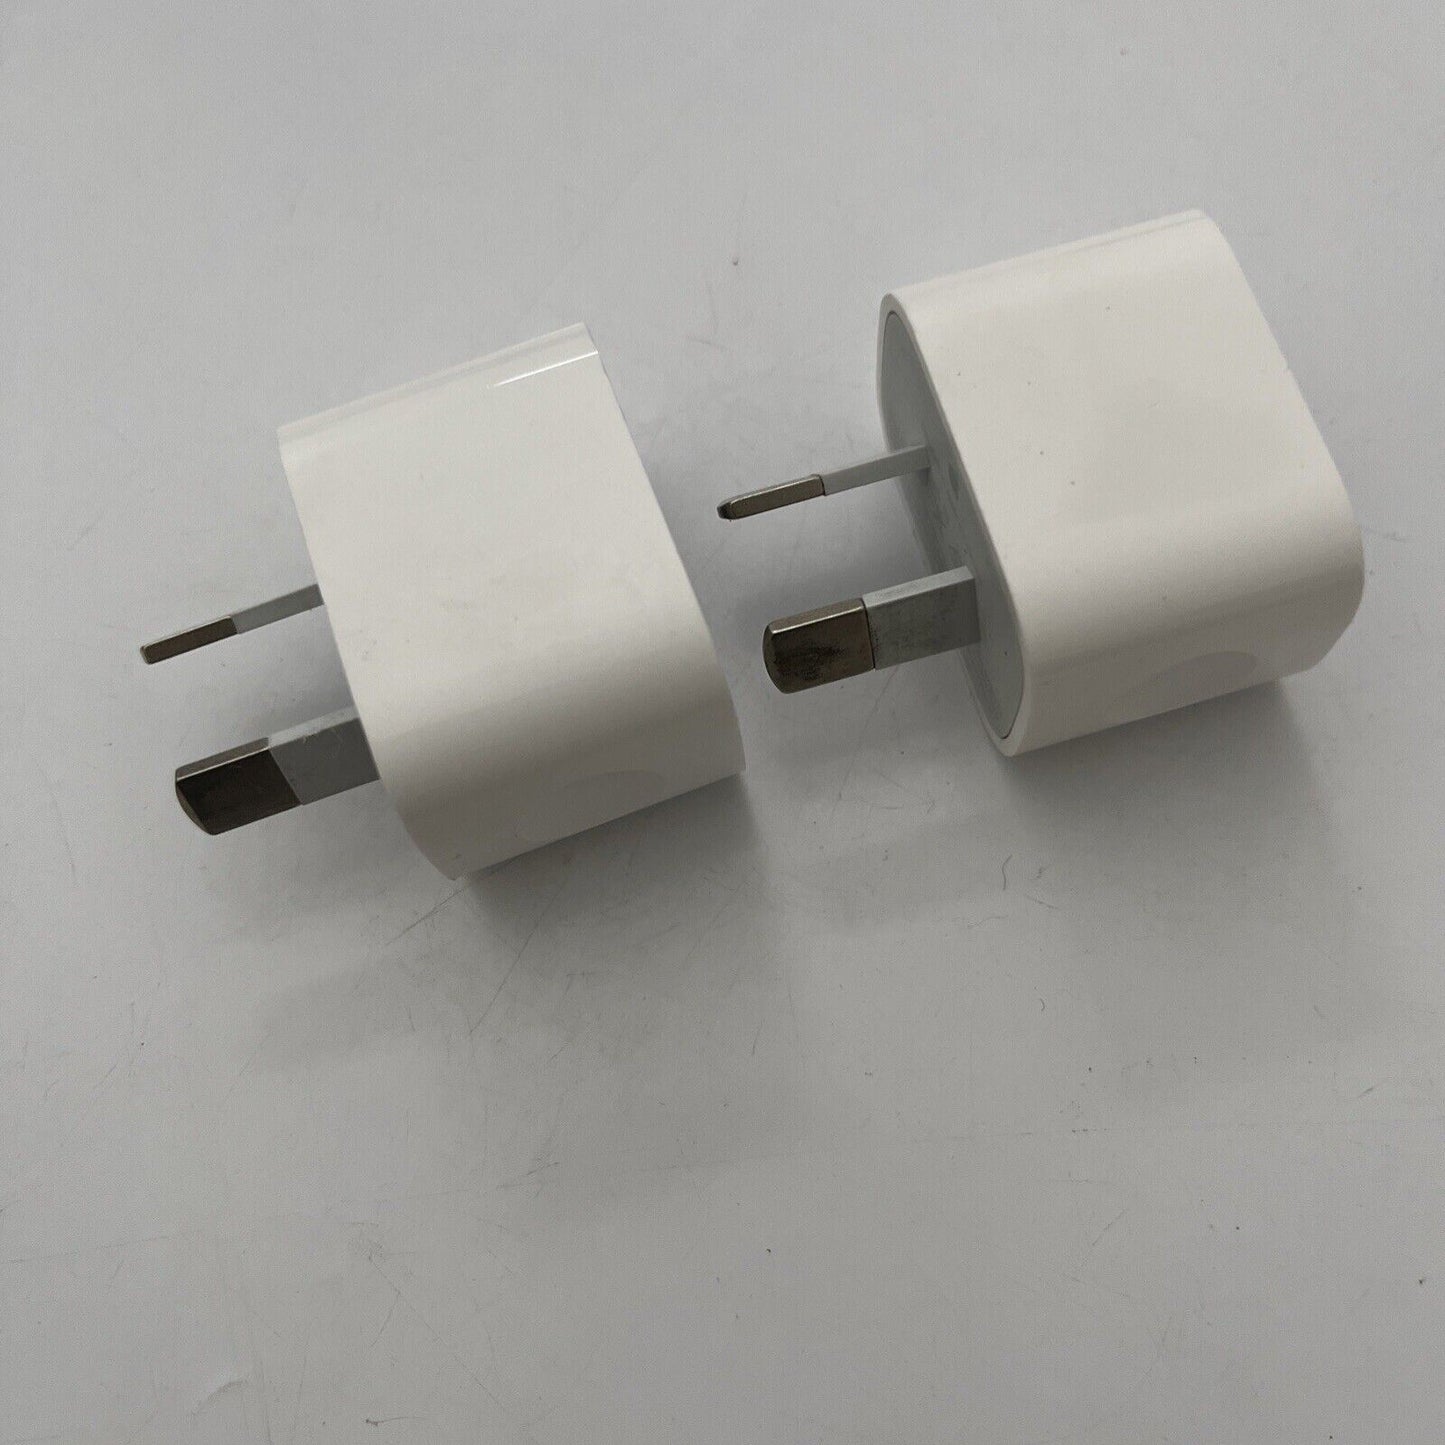 2 x Genuine Apple A1444 USB Charger